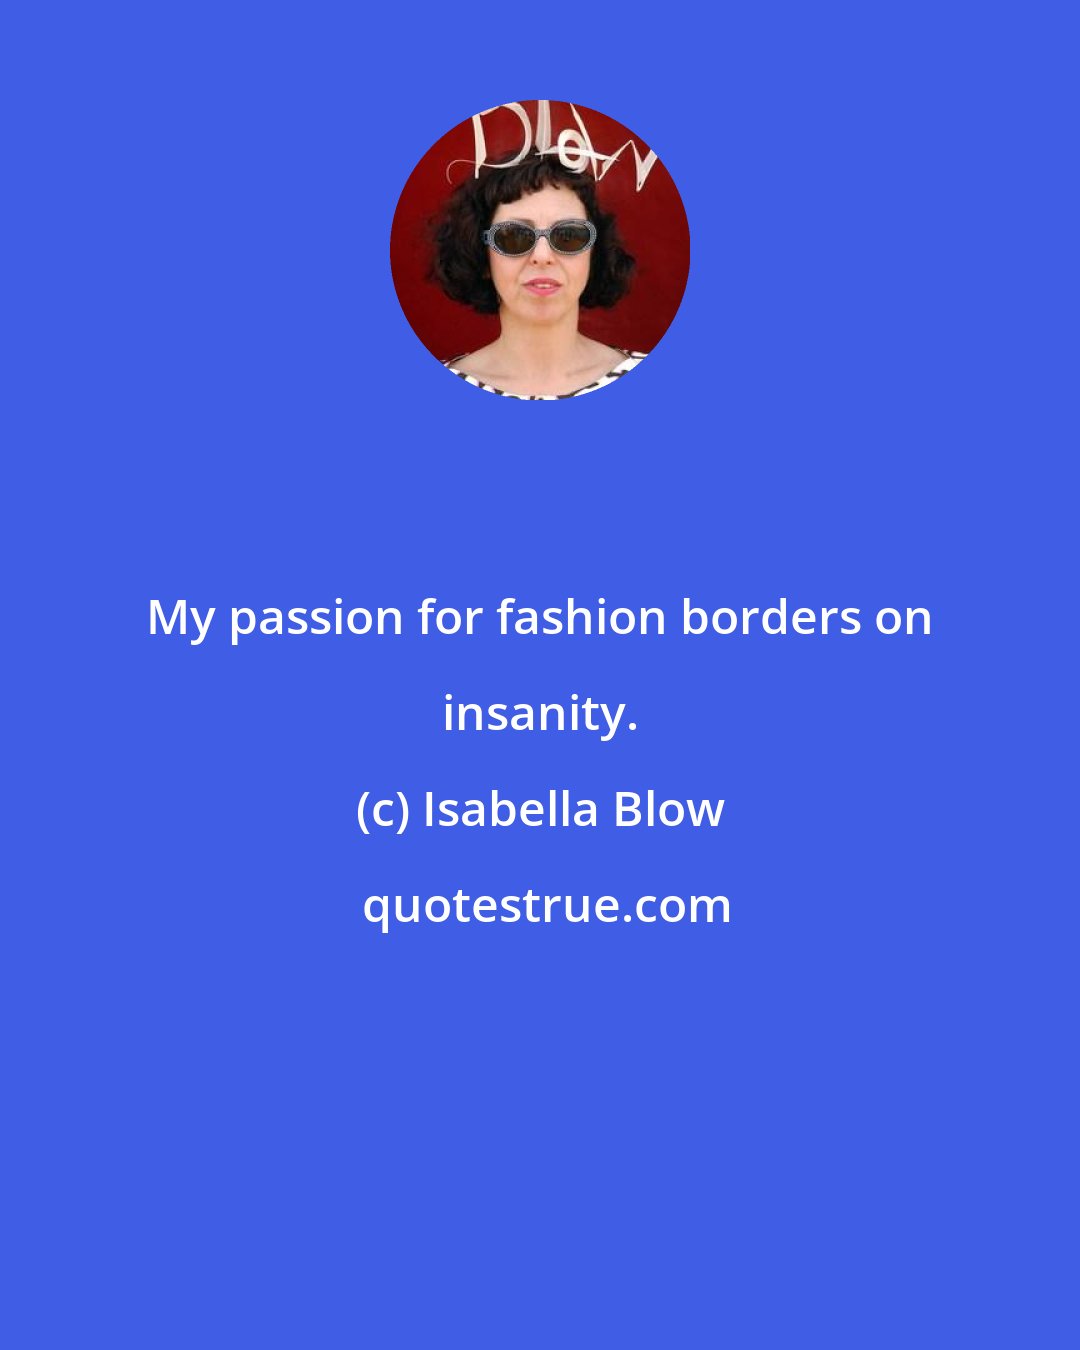 Isabella Blow: My passion for fashion borders on insanity.